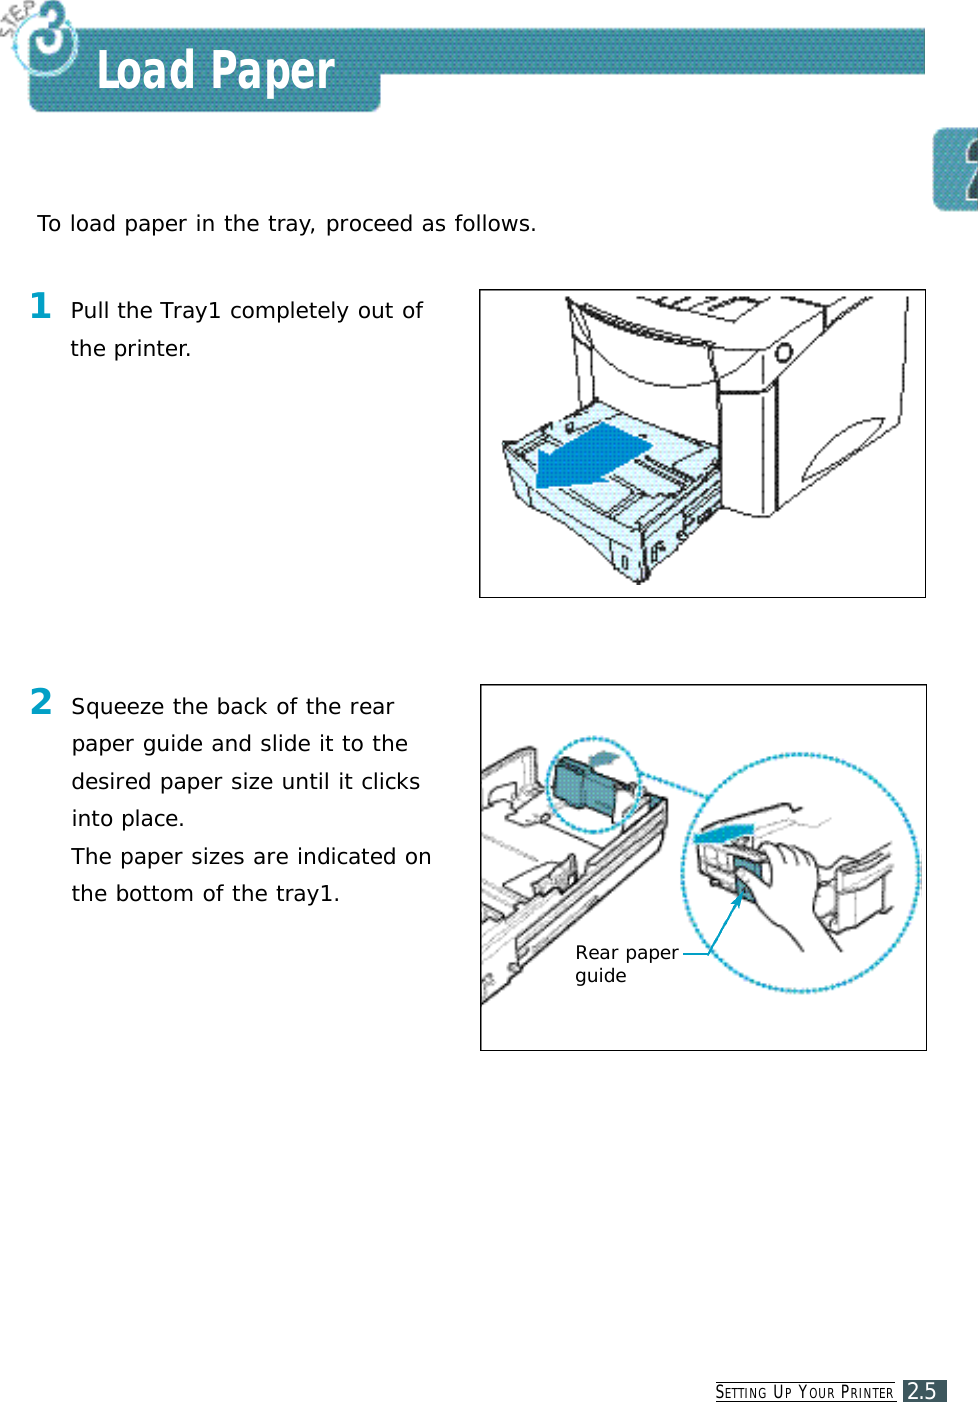 SE T T I N G UPYO U R PR I N T E R2.5Load PaperTo load paper in the tray, proceed as follows.1Pull the Tray1 completely out ofthe printer.2Squeeze the back of the rearpaper guide and slide it to thedesired paper size until it clicksinto place.The paper sizes are indicated onthe bottom of the tray1.Rear paperguide